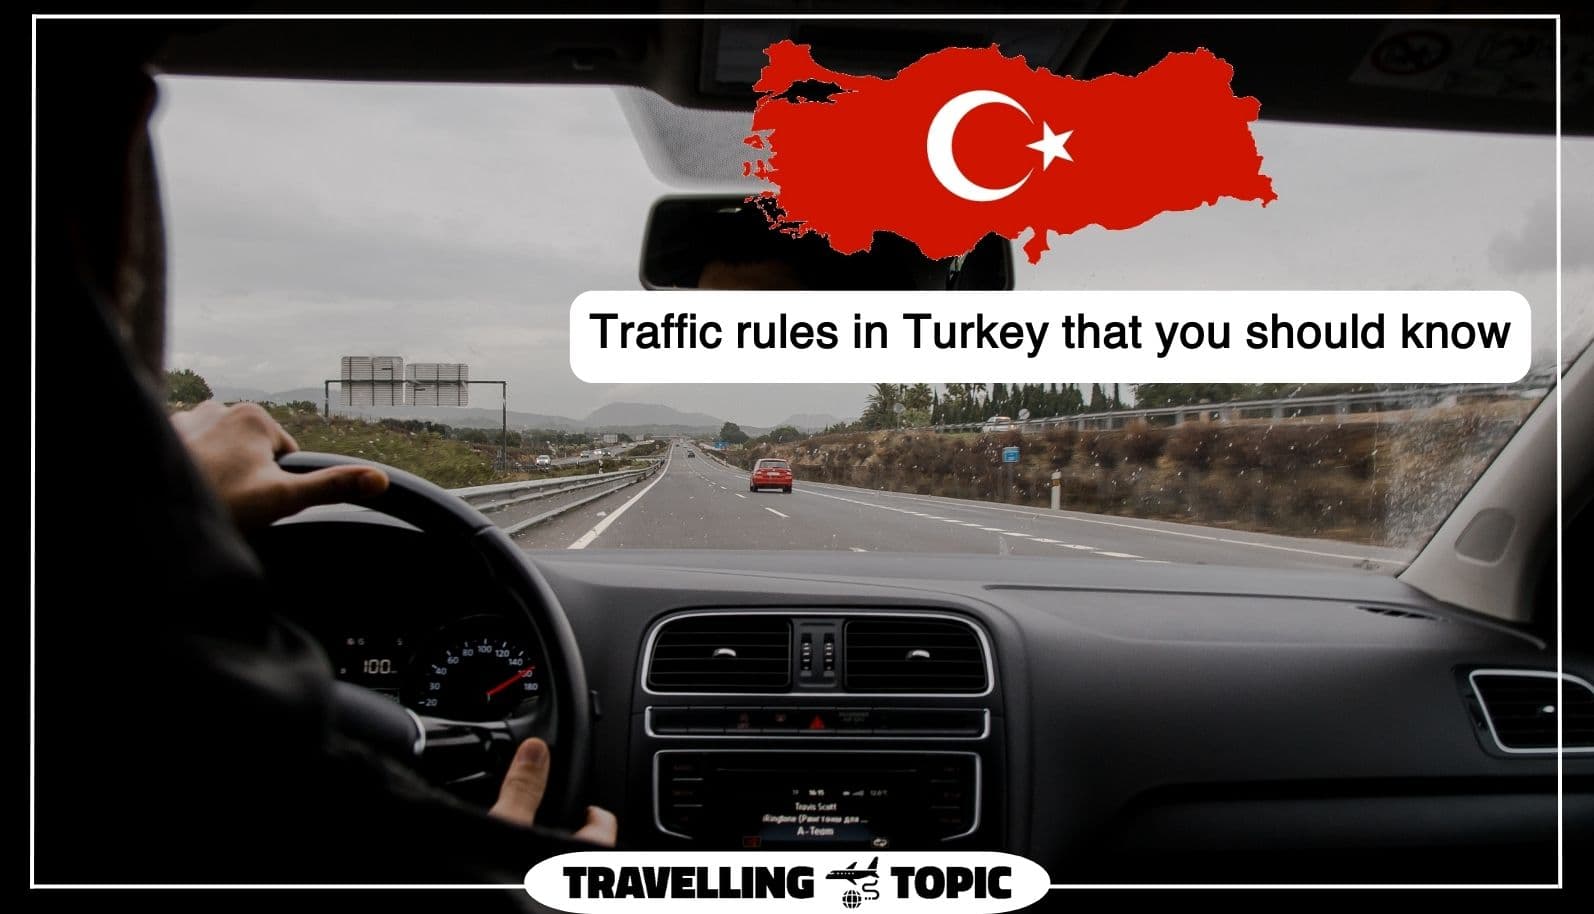 Traffic rules in Turkey that you should know